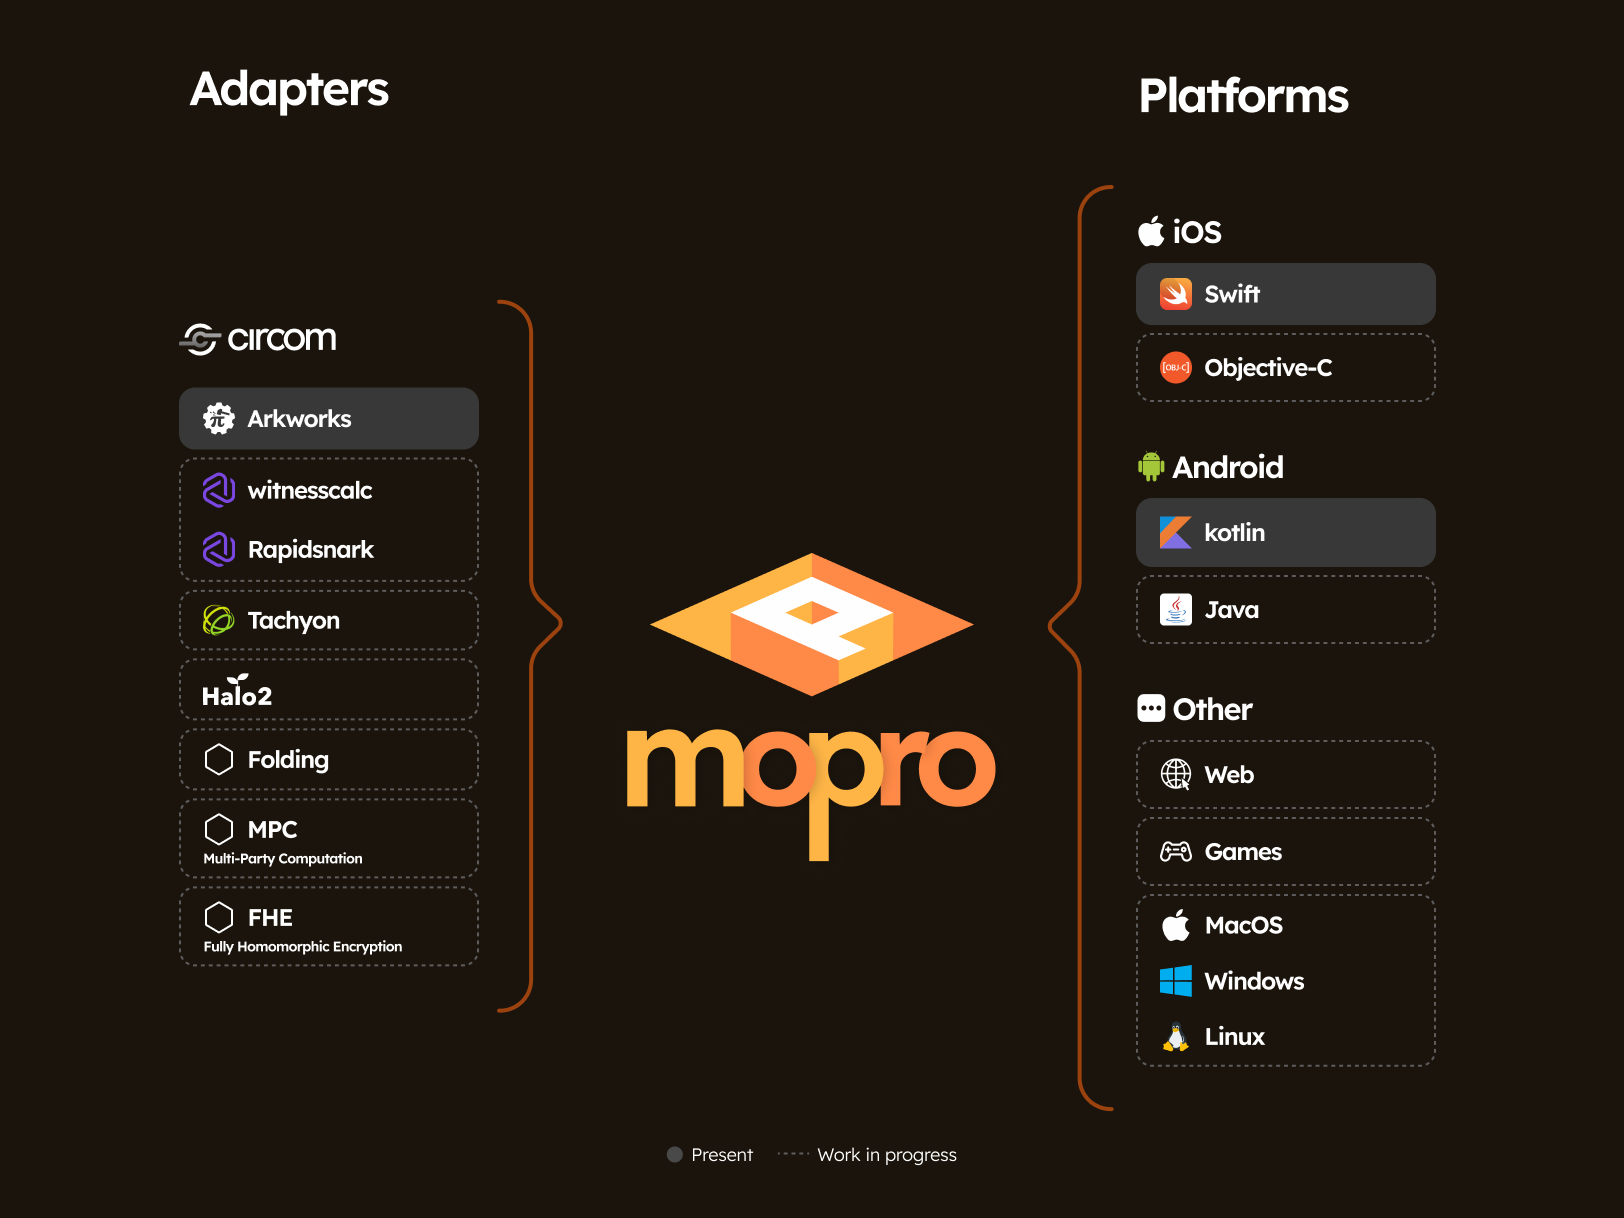 mopro adapters and platforms